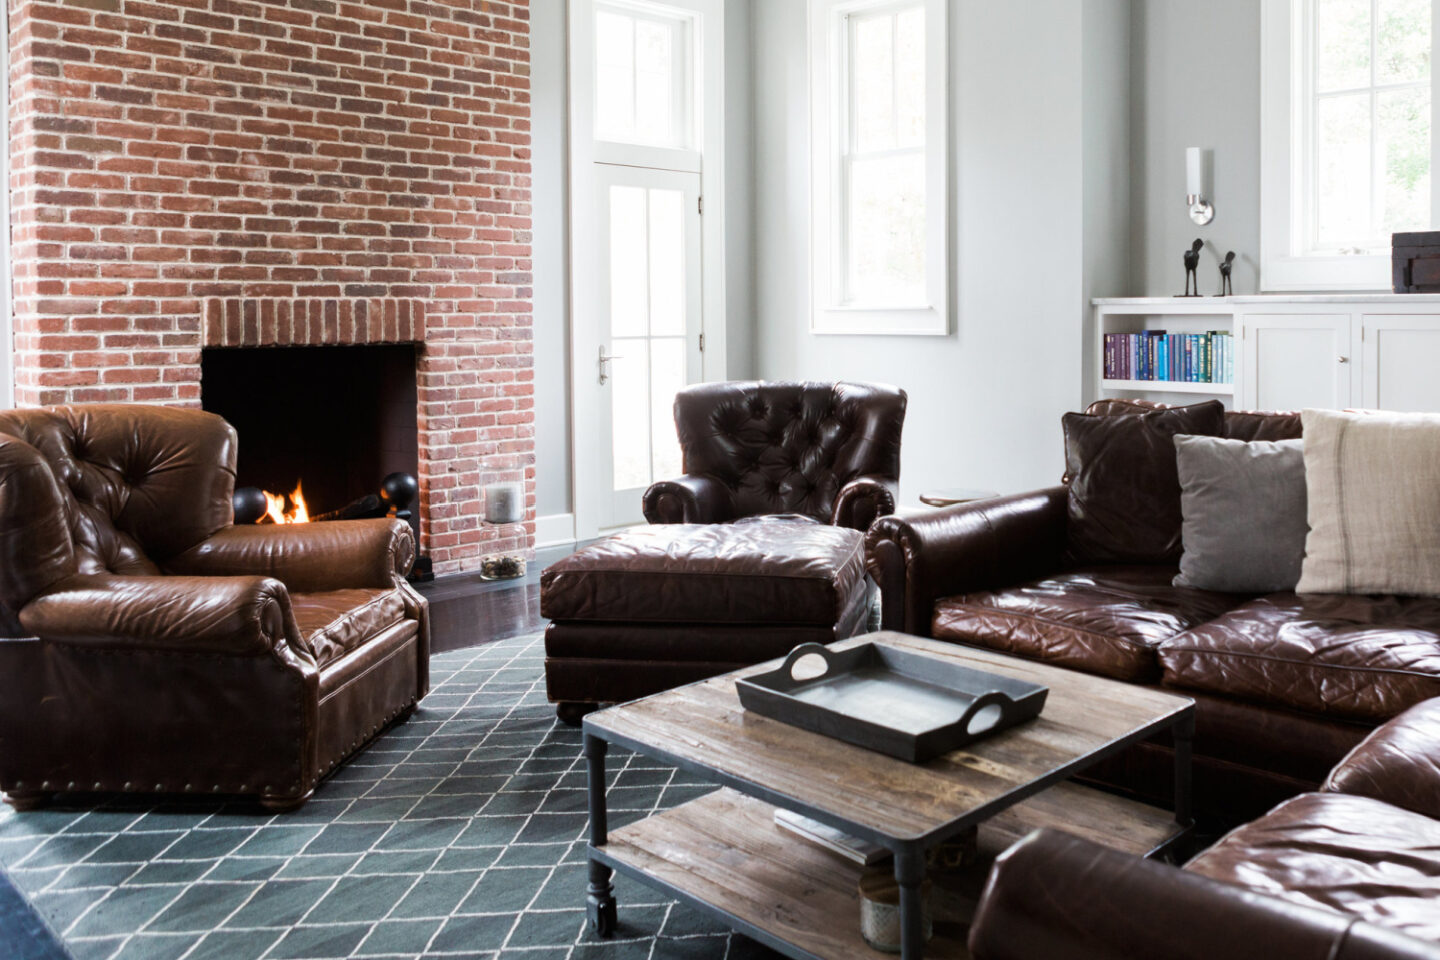 Family room with red brick fireplaceand tufted leather RH furnishings - Hello Lovely Studio.